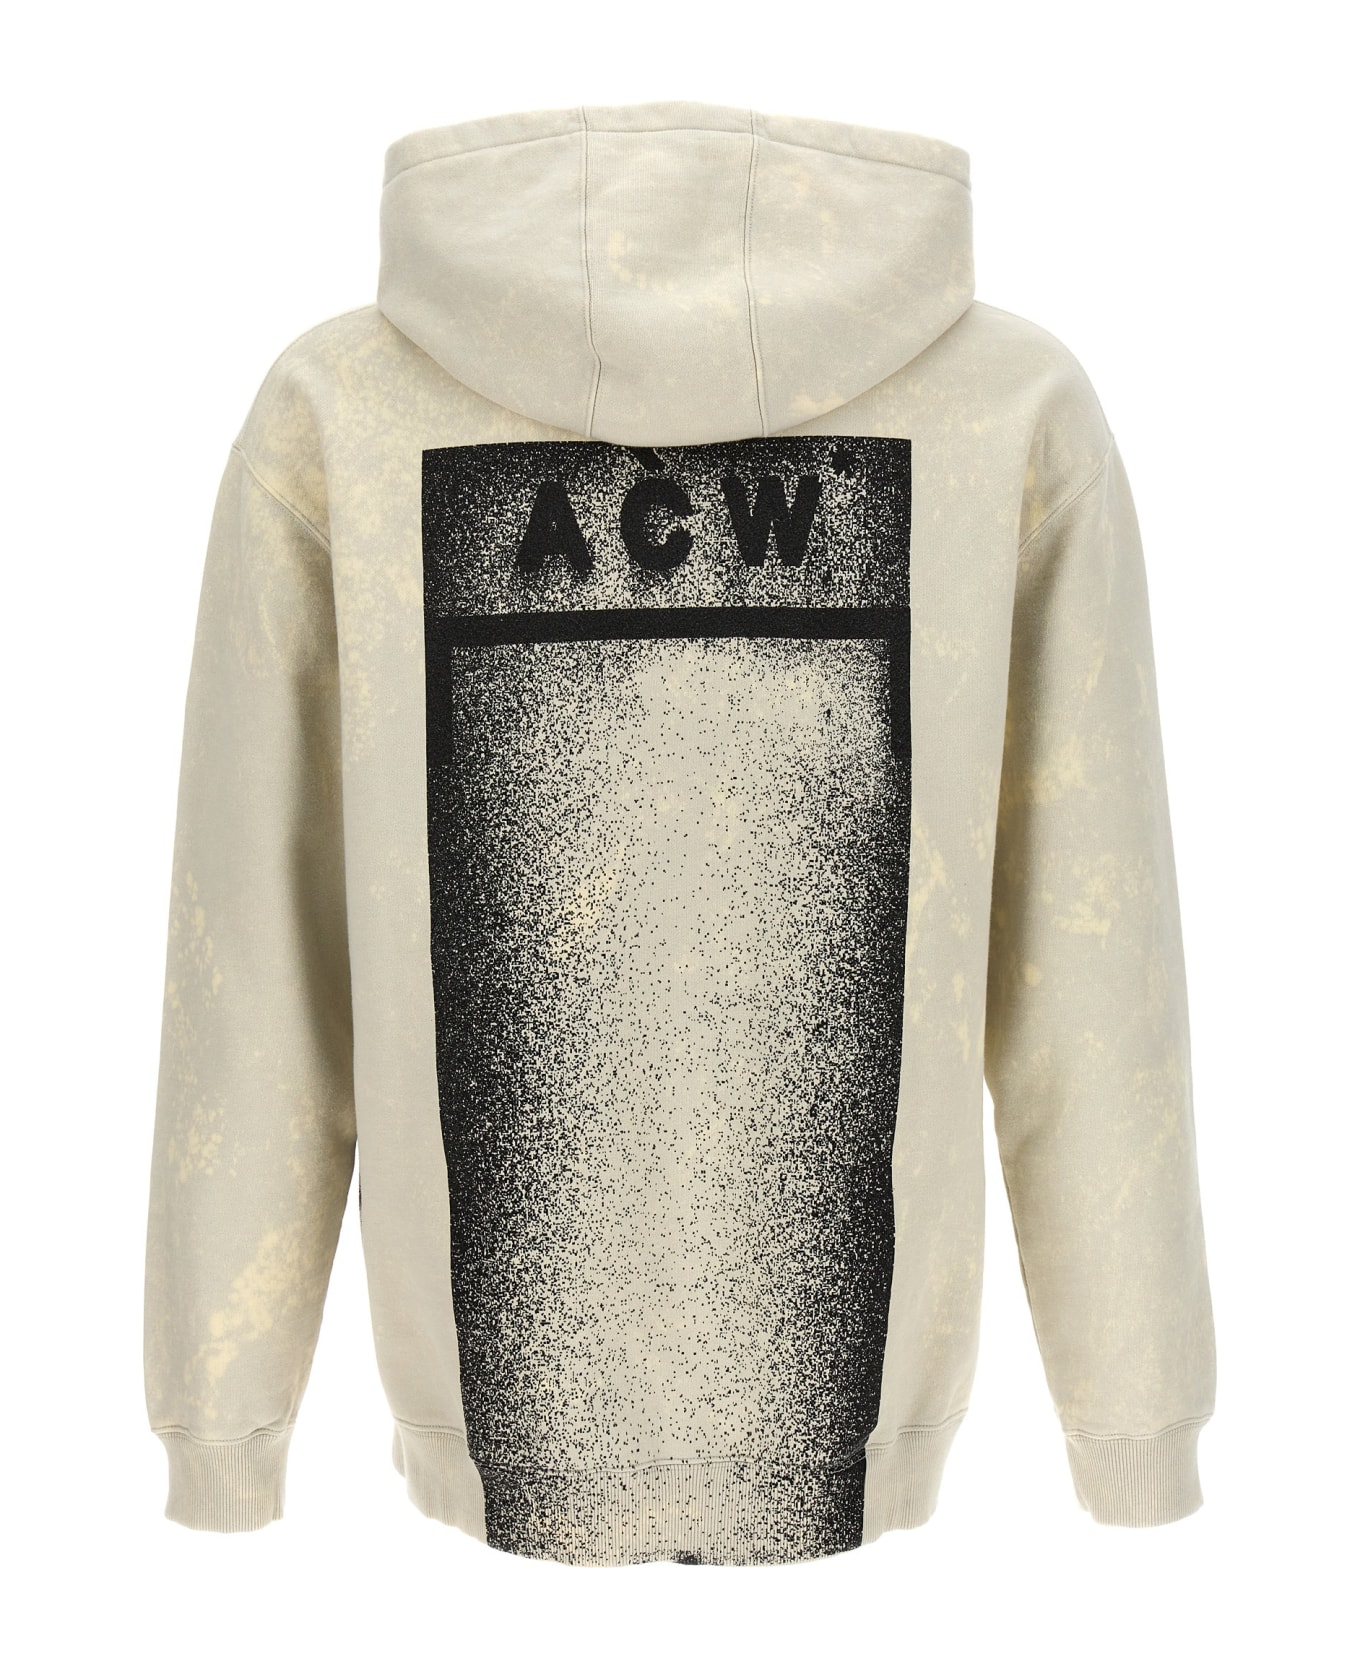 A-COLD-WALL 'bouchards' Hoodie - Multicolor